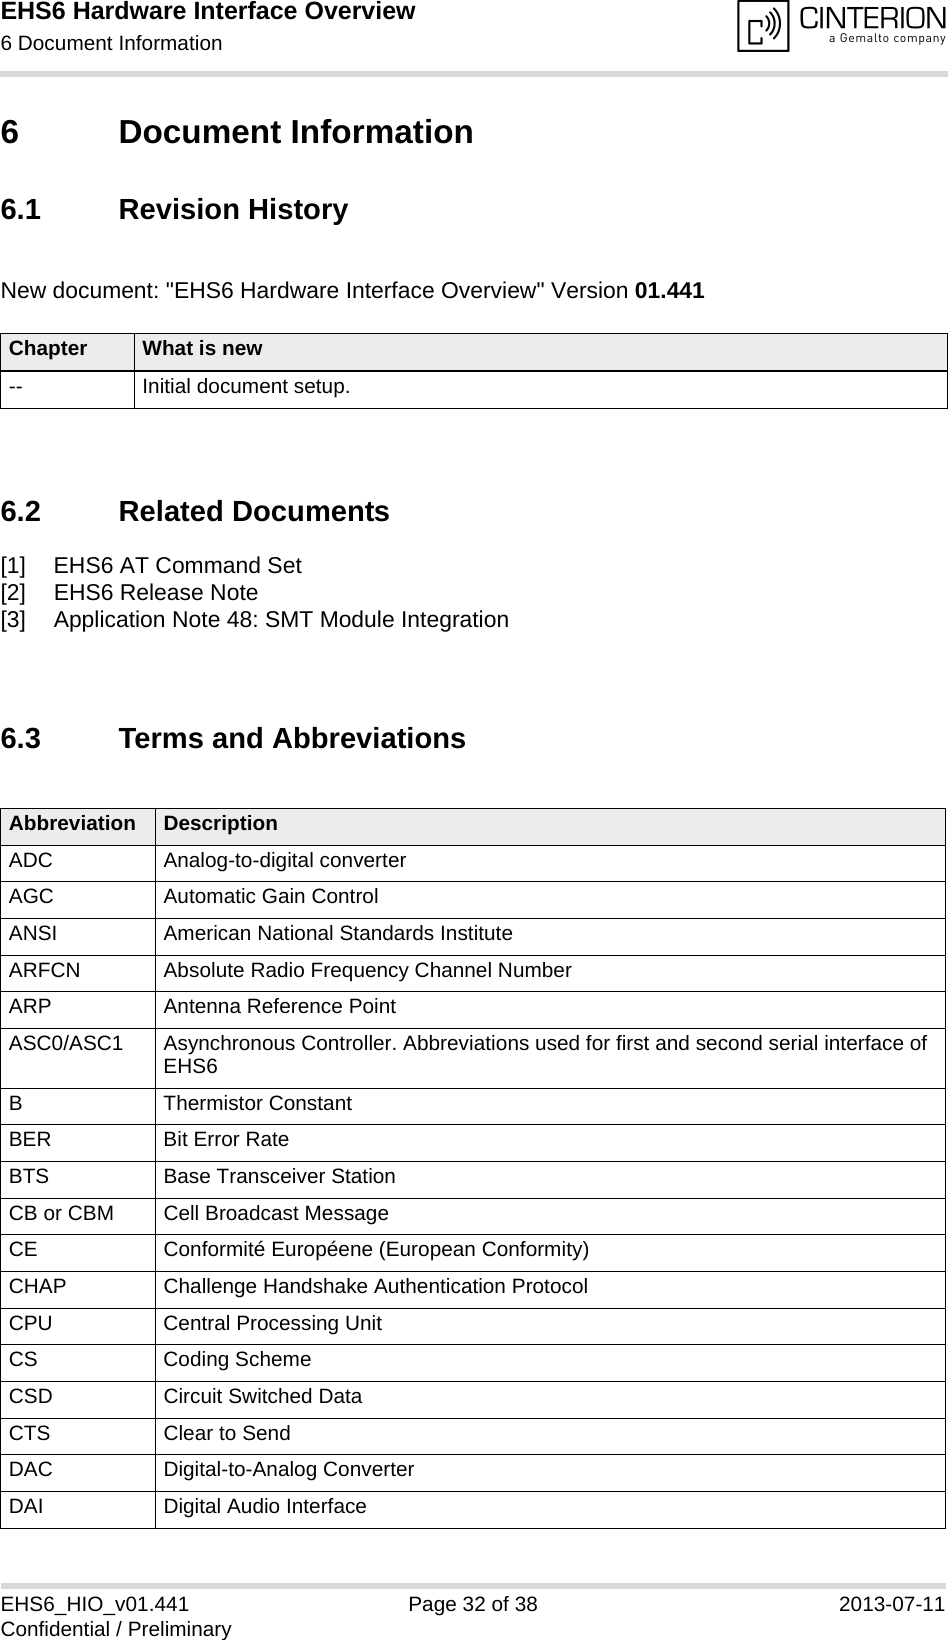 EHS6 Hardware Interface Overview6 Document Information36EHS6_HIO_v01.441 Page 32 of 38 2013-07-11Confidential / Preliminary6 Document Information6.1 Revision HistoryNew document: &quot;EHS6 Hardware Interface Overview&quot; Version 01.4416.2 Related Documents[1] EHS6 AT Command Set[2] EHS6 Release Note[3] Application Note 48: SMT Module Integration6.3 Terms and AbbreviationsChapter What is new-- Initial document setup.Abbreviation DescriptionADC Analog-to-digital converterAGC Automatic Gain ControlANSI American National Standards InstituteARFCN Absolute Radio Frequency Channel NumberARP Antenna Reference PointASC0/ASC1 Asynchronous Controller. Abbreviations used for first and second serial interface of EHS6B Thermistor ConstantBER Bit Error RateBTS Base Transceiver StationCB or CBM Cell Broadcast MessageCE Conformité Européene (European Conformity)CHAP Challenge Handshake Authentication ProtocolCPU Central Processing UnitCS Coding SchemeCSD Circuit Switched DataCTS Clear to SendDAC Digital-to-Analog ConverterDAI Digital Audio Interface